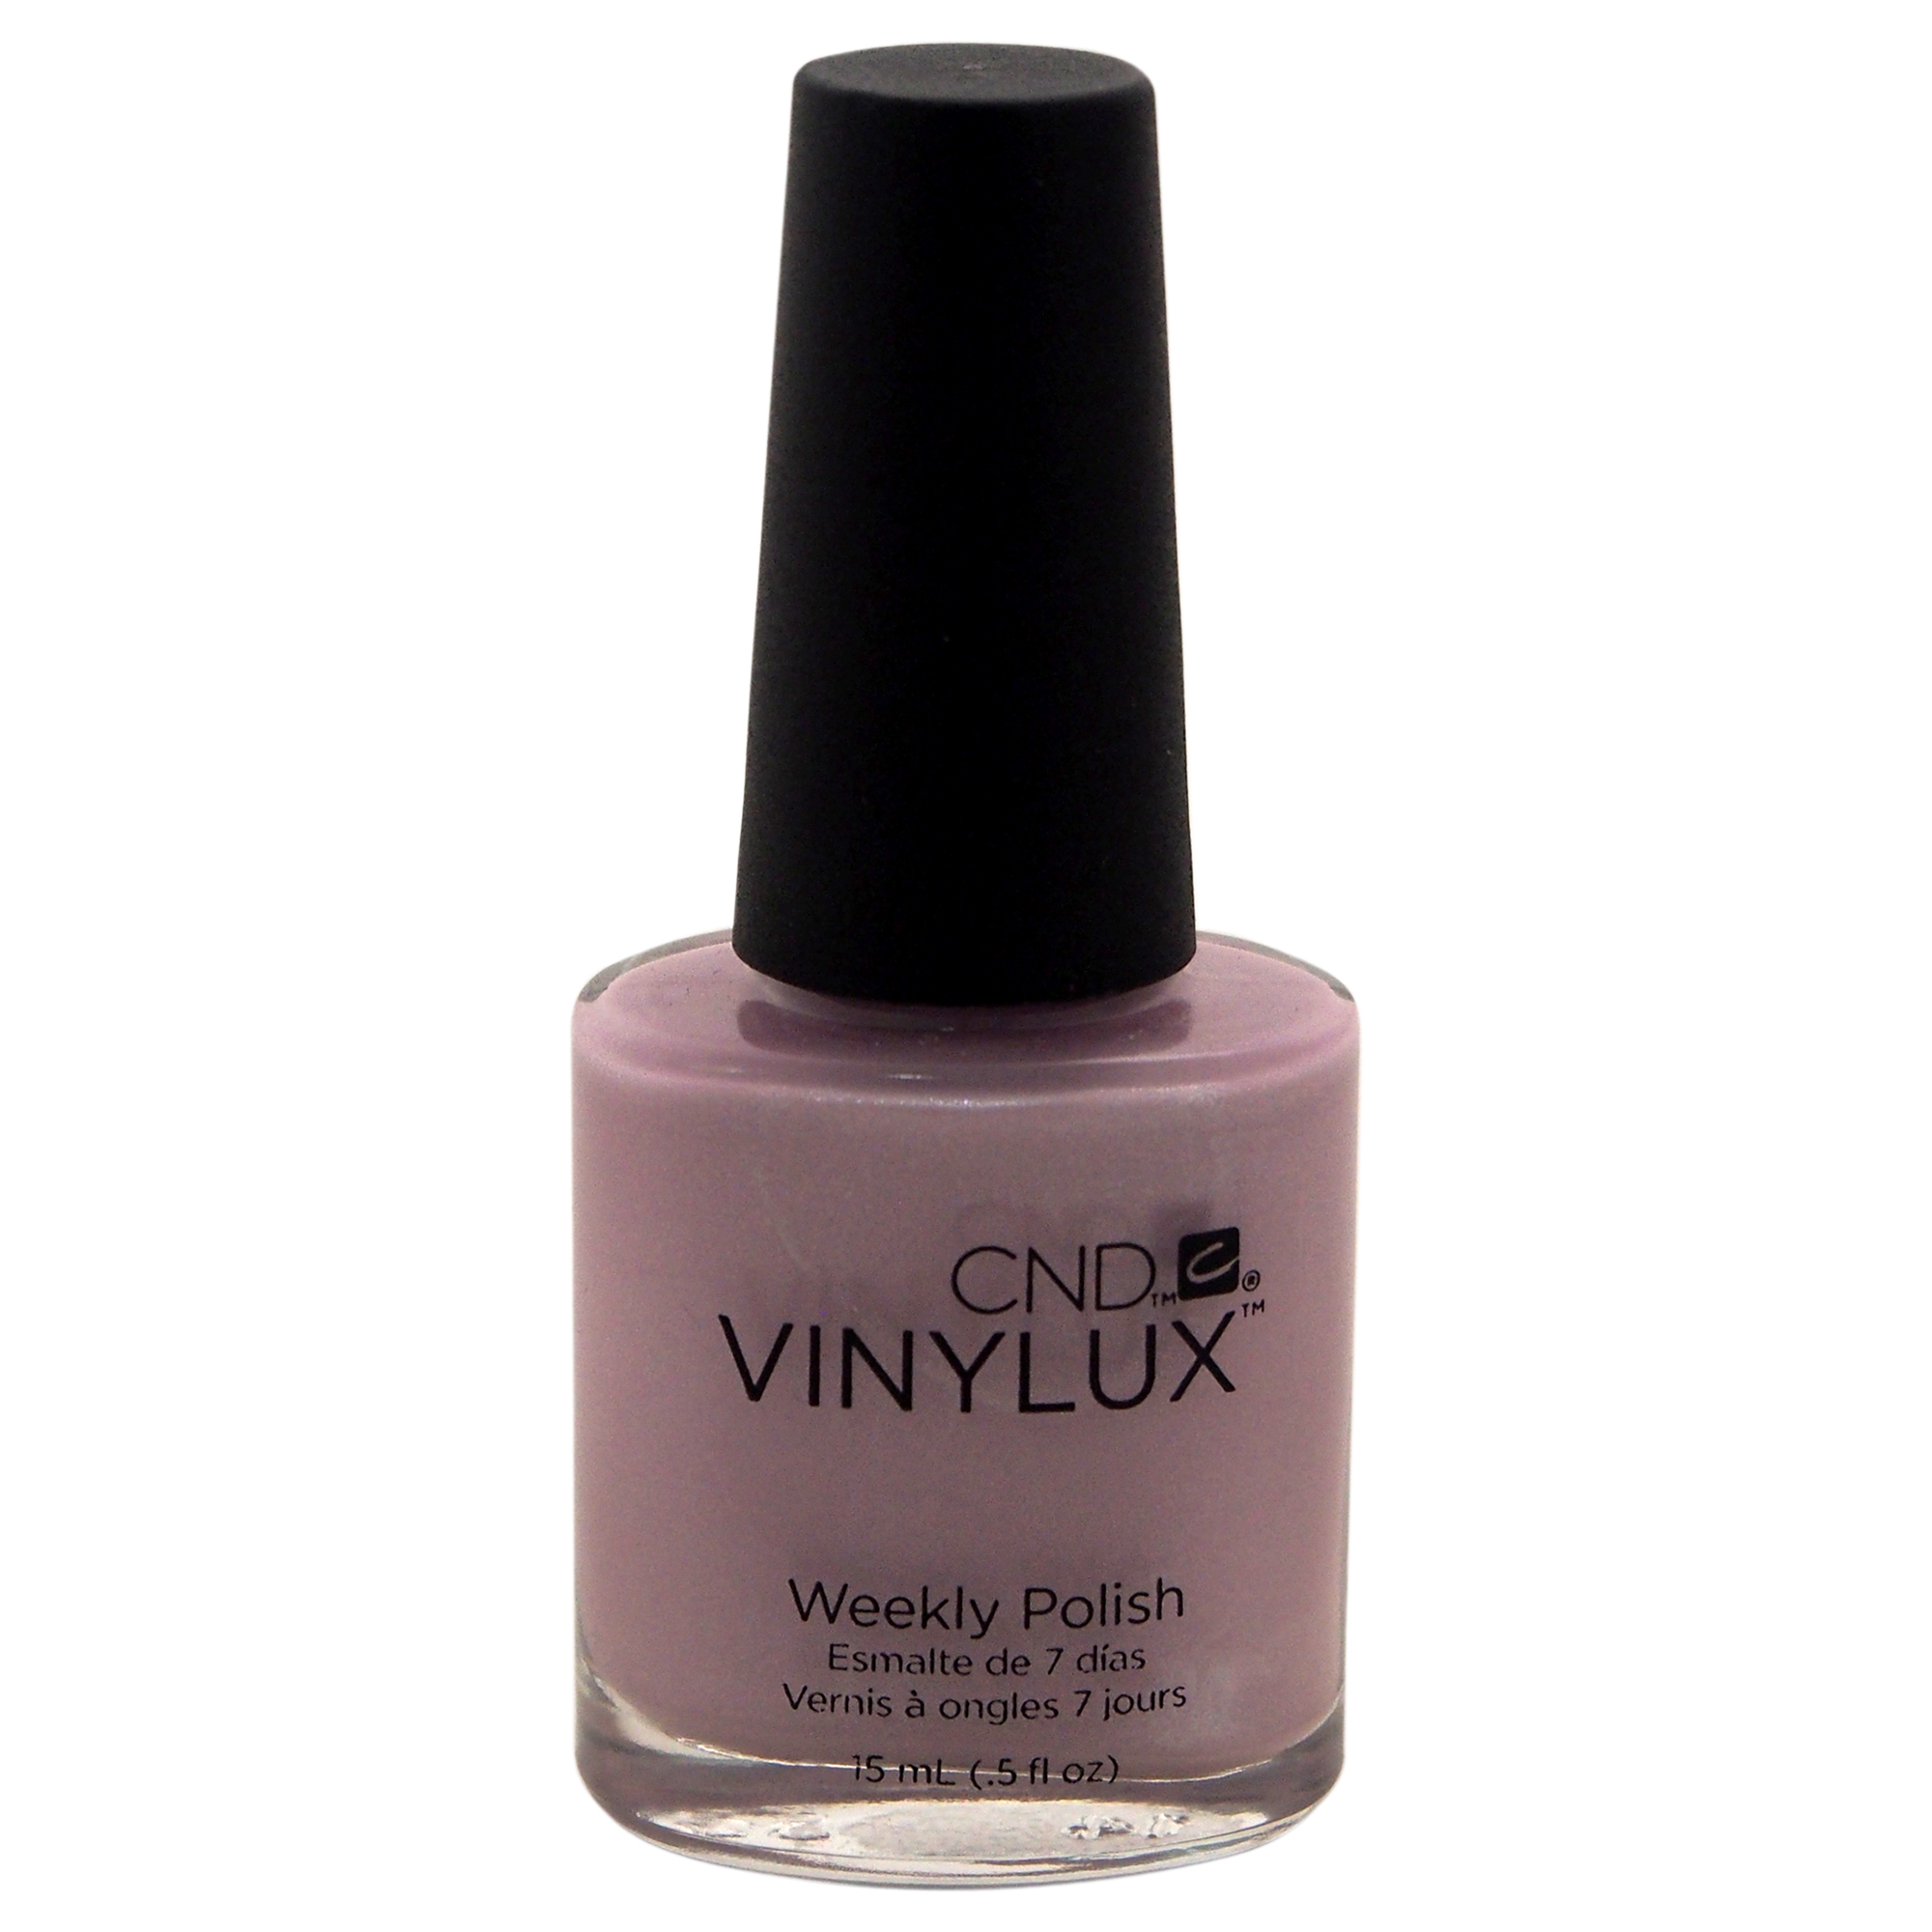 CND Vinylux Weekly Polish - # 216 Lavender Lace by  for Women - 0.5 oz Nail Polish